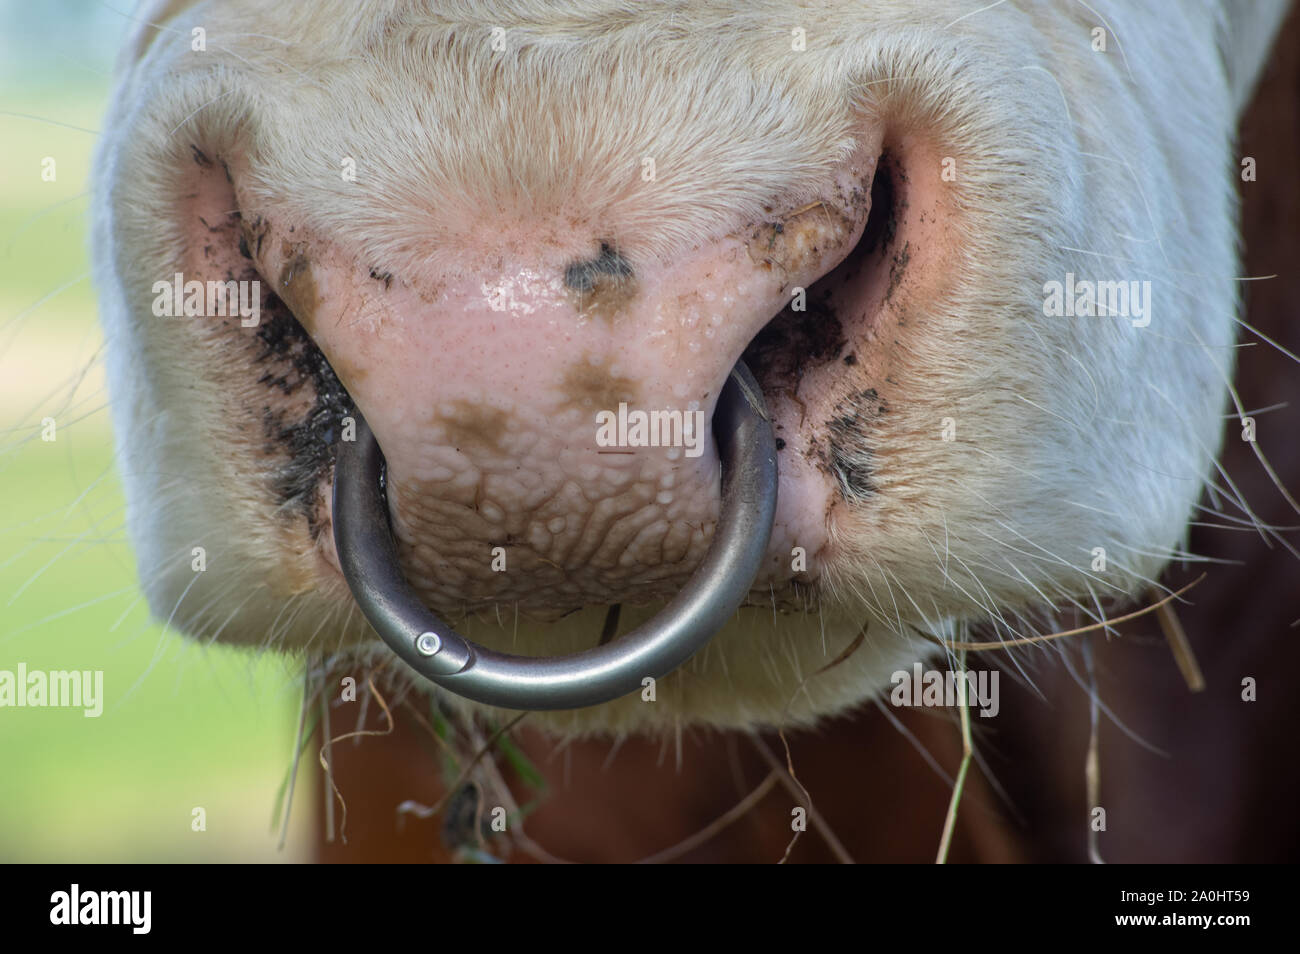 nose ring in the snout of dairy cattle Stock Photo